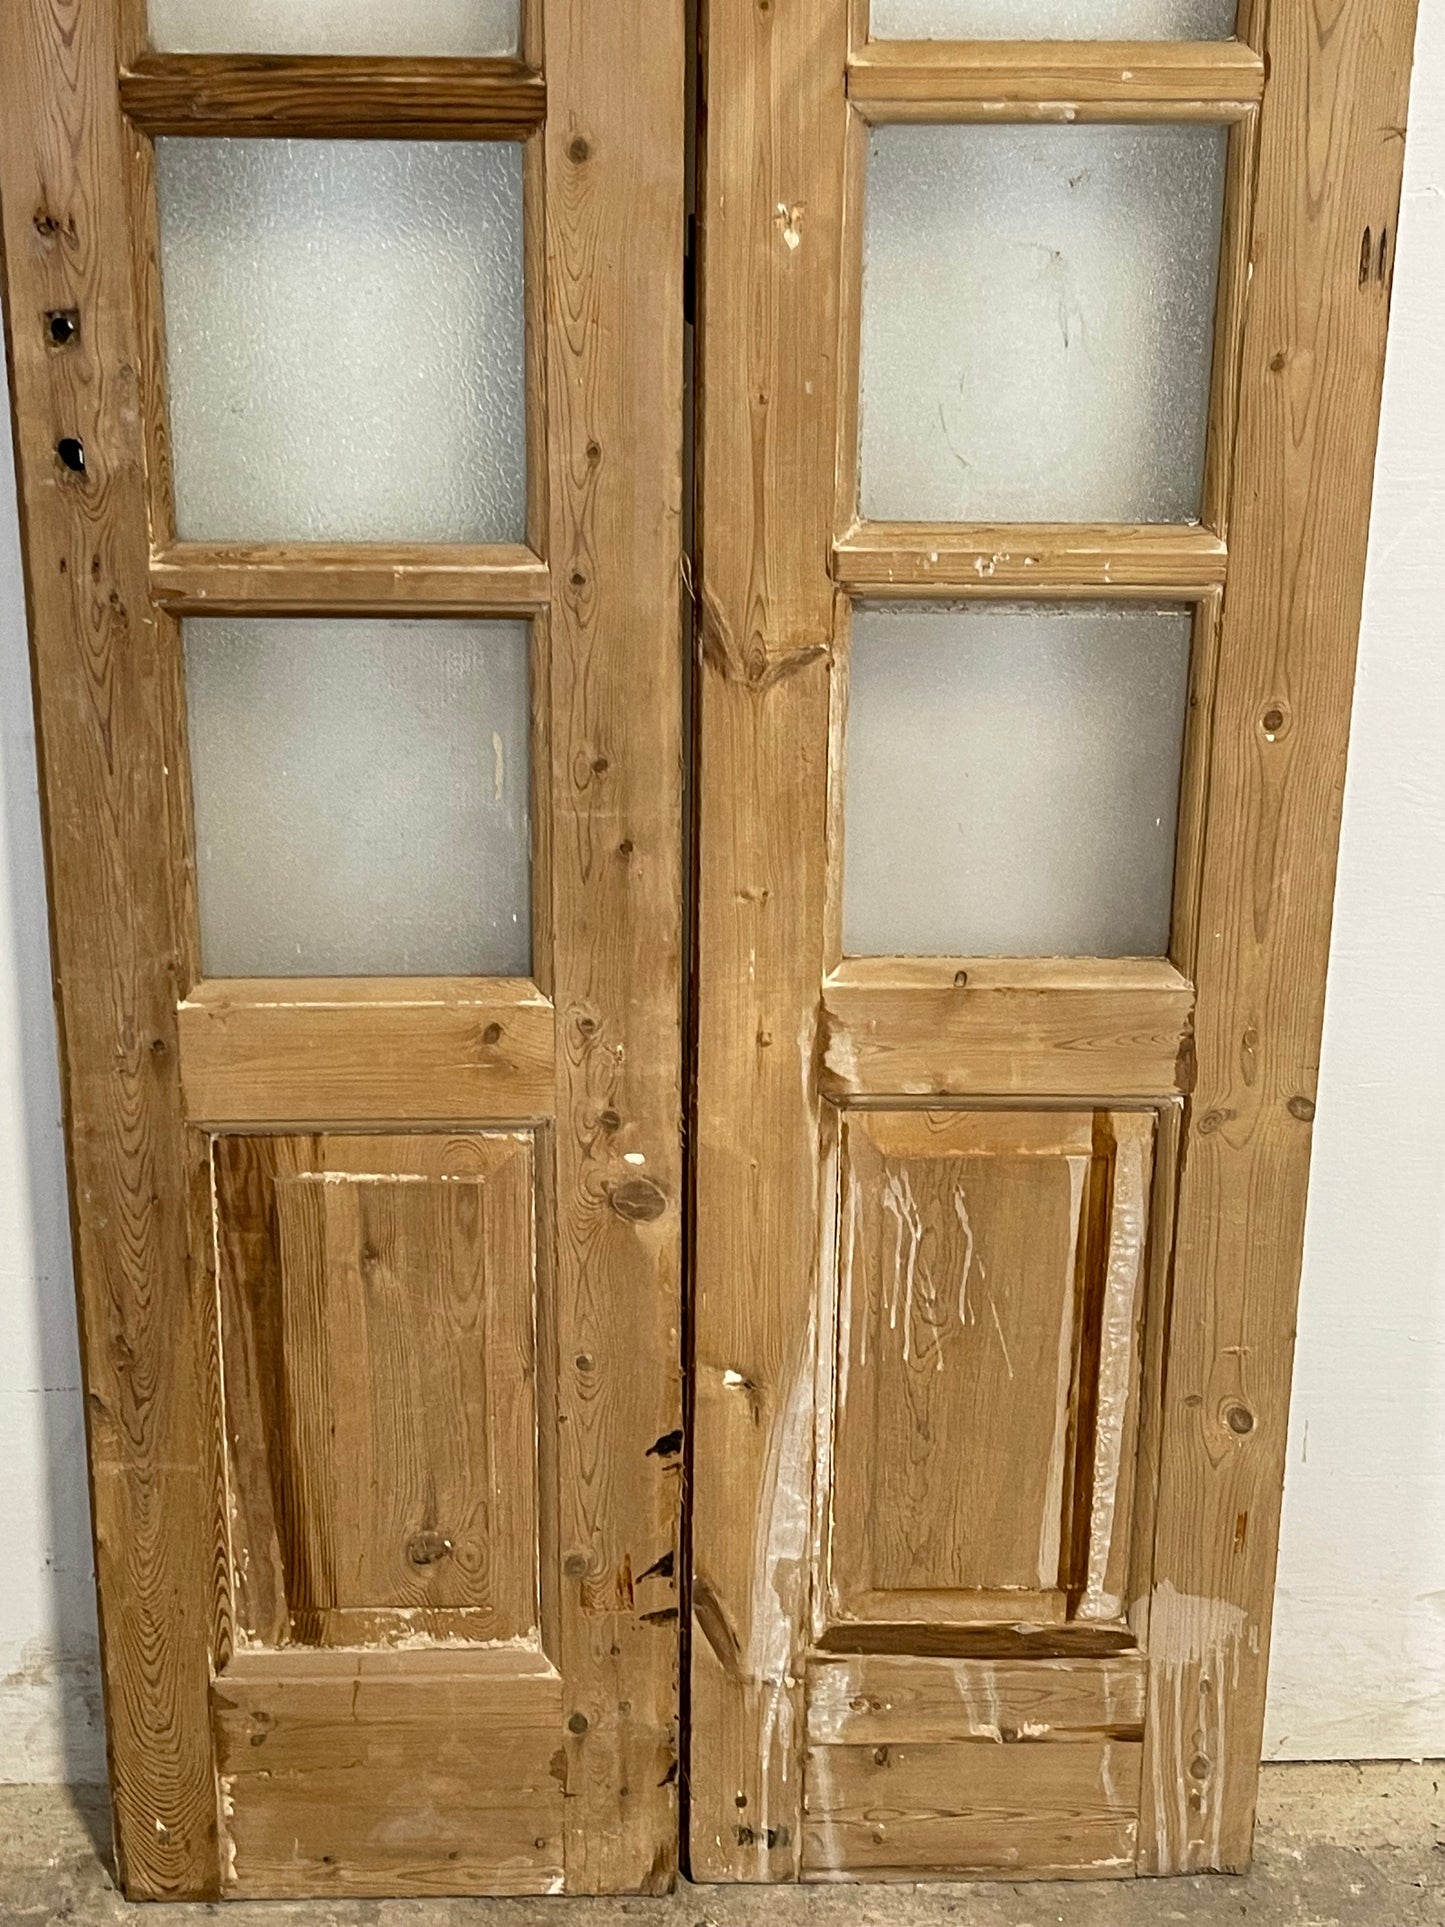 Antique French panel doors with glass (89x33.75) L113